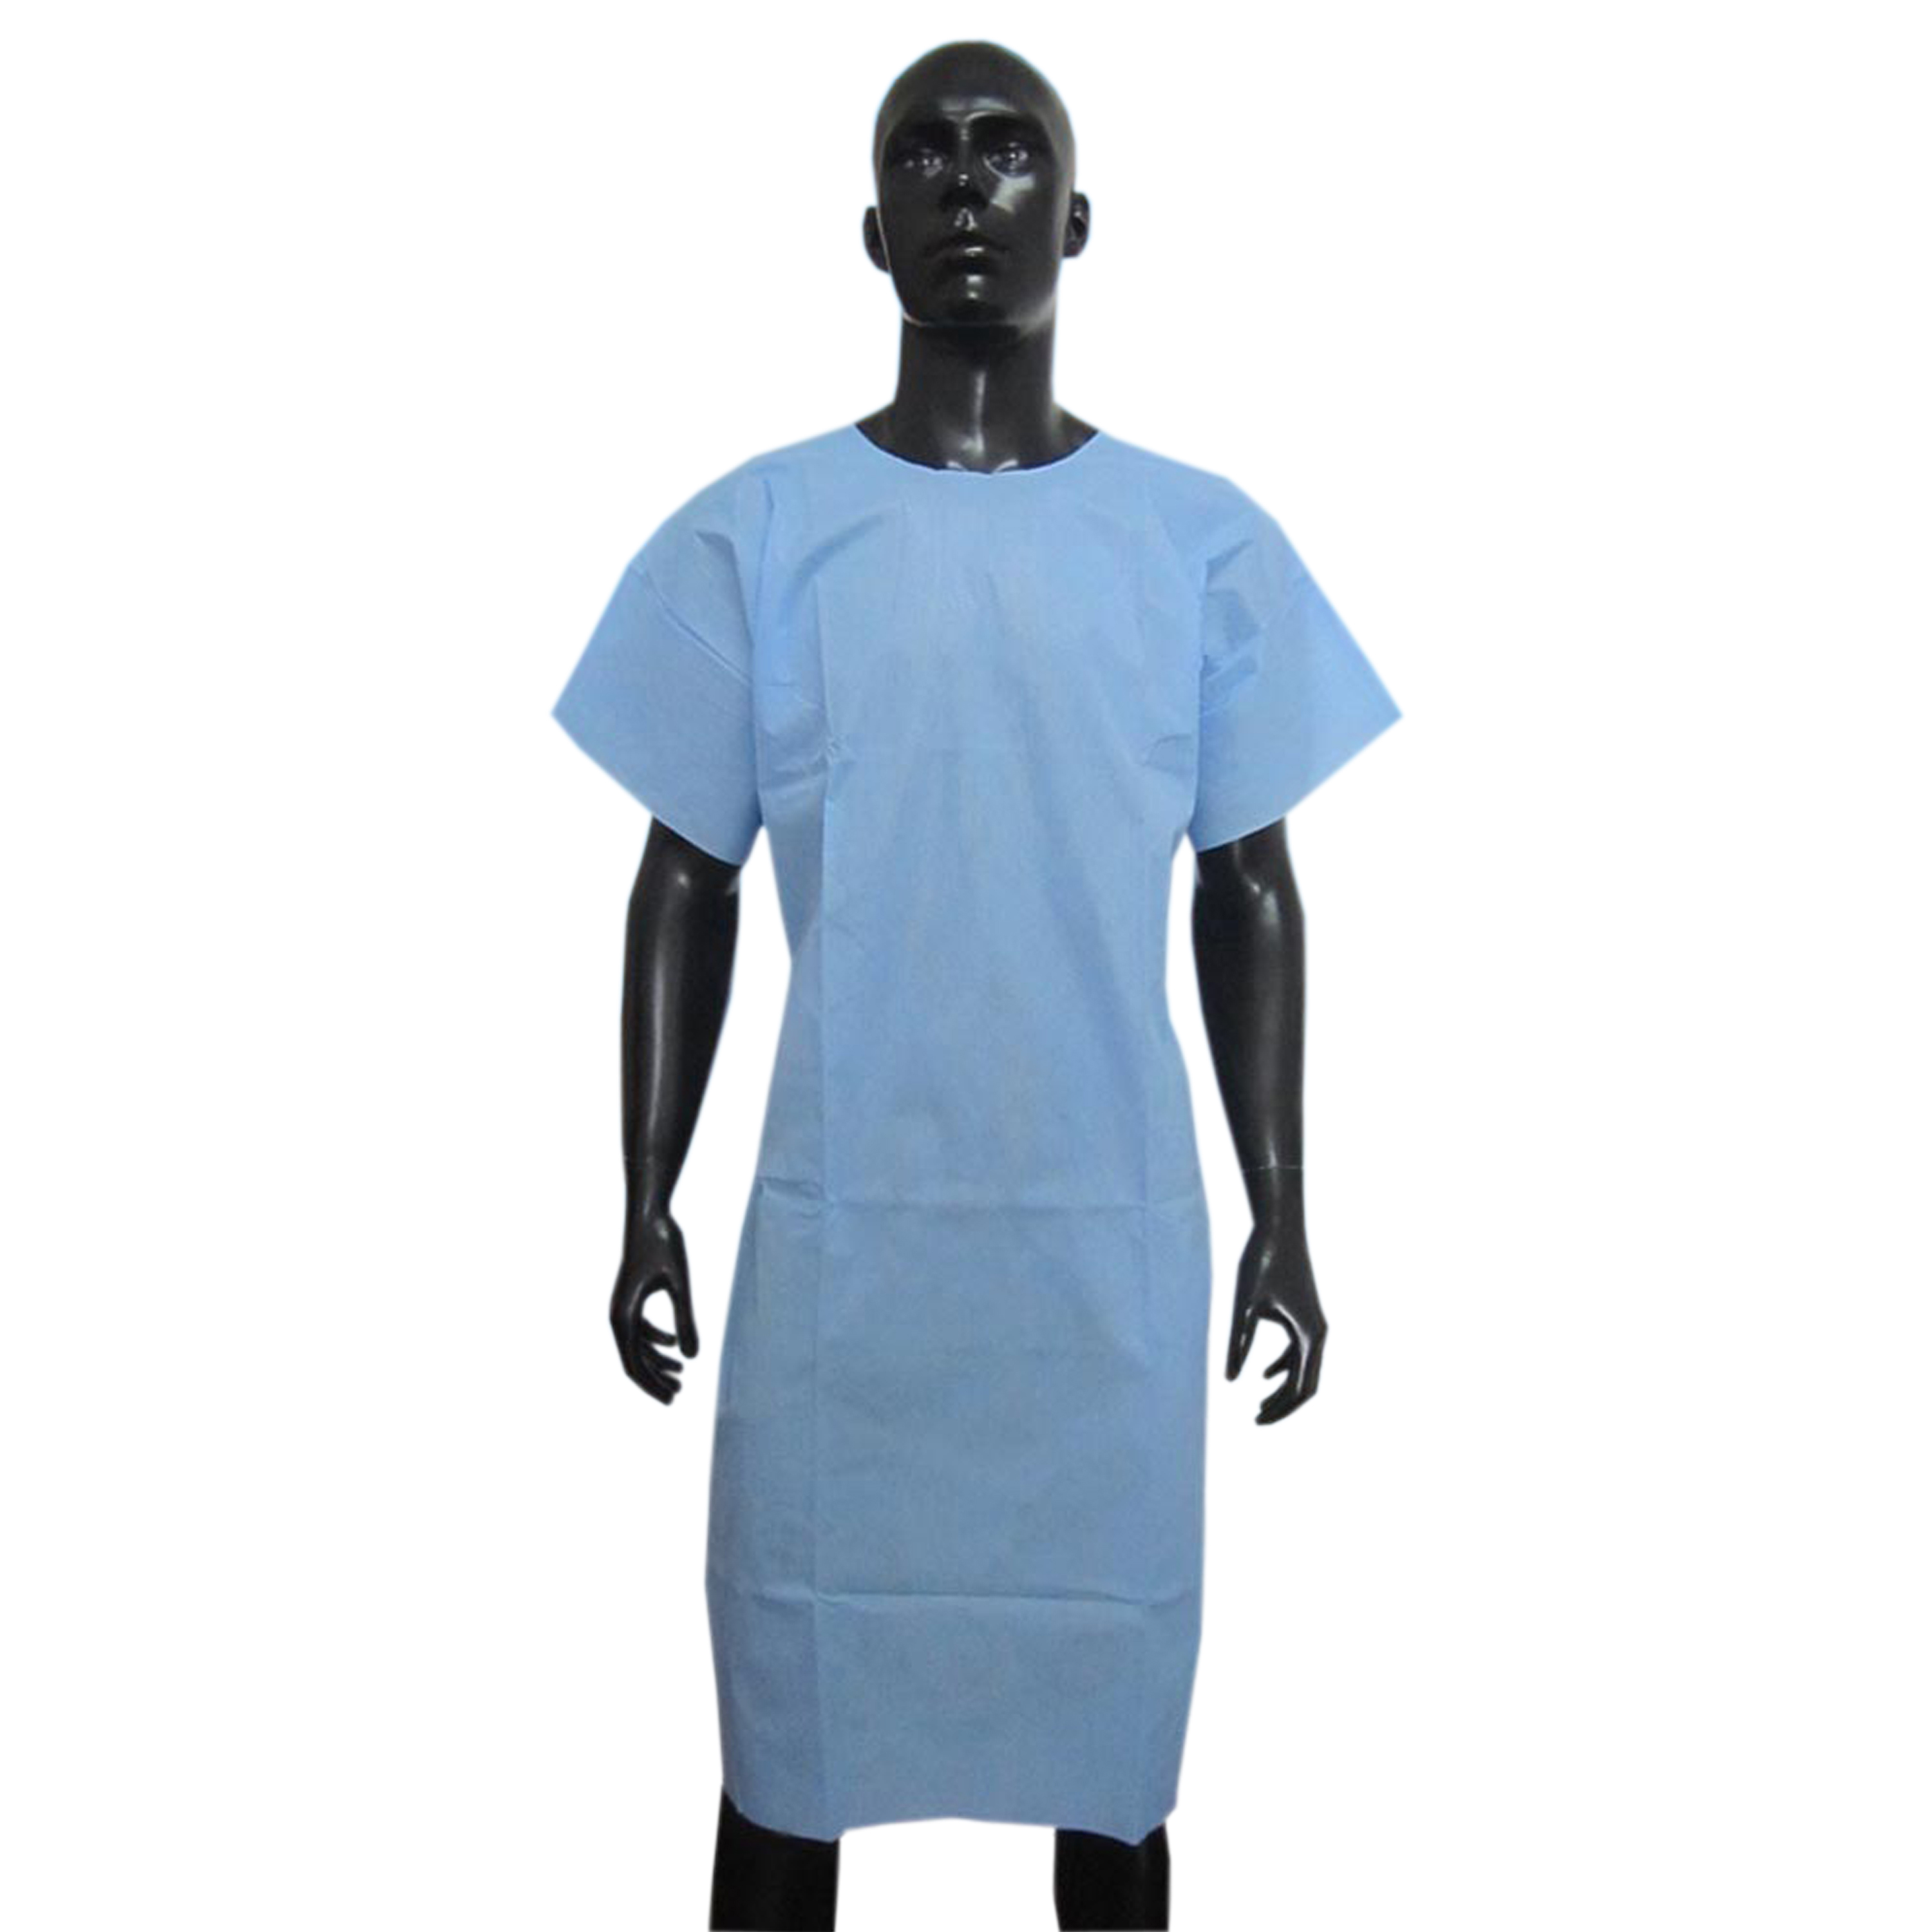 SMS Patient Gown with Long Sleeves. Disposable SMS Patient Gowns 